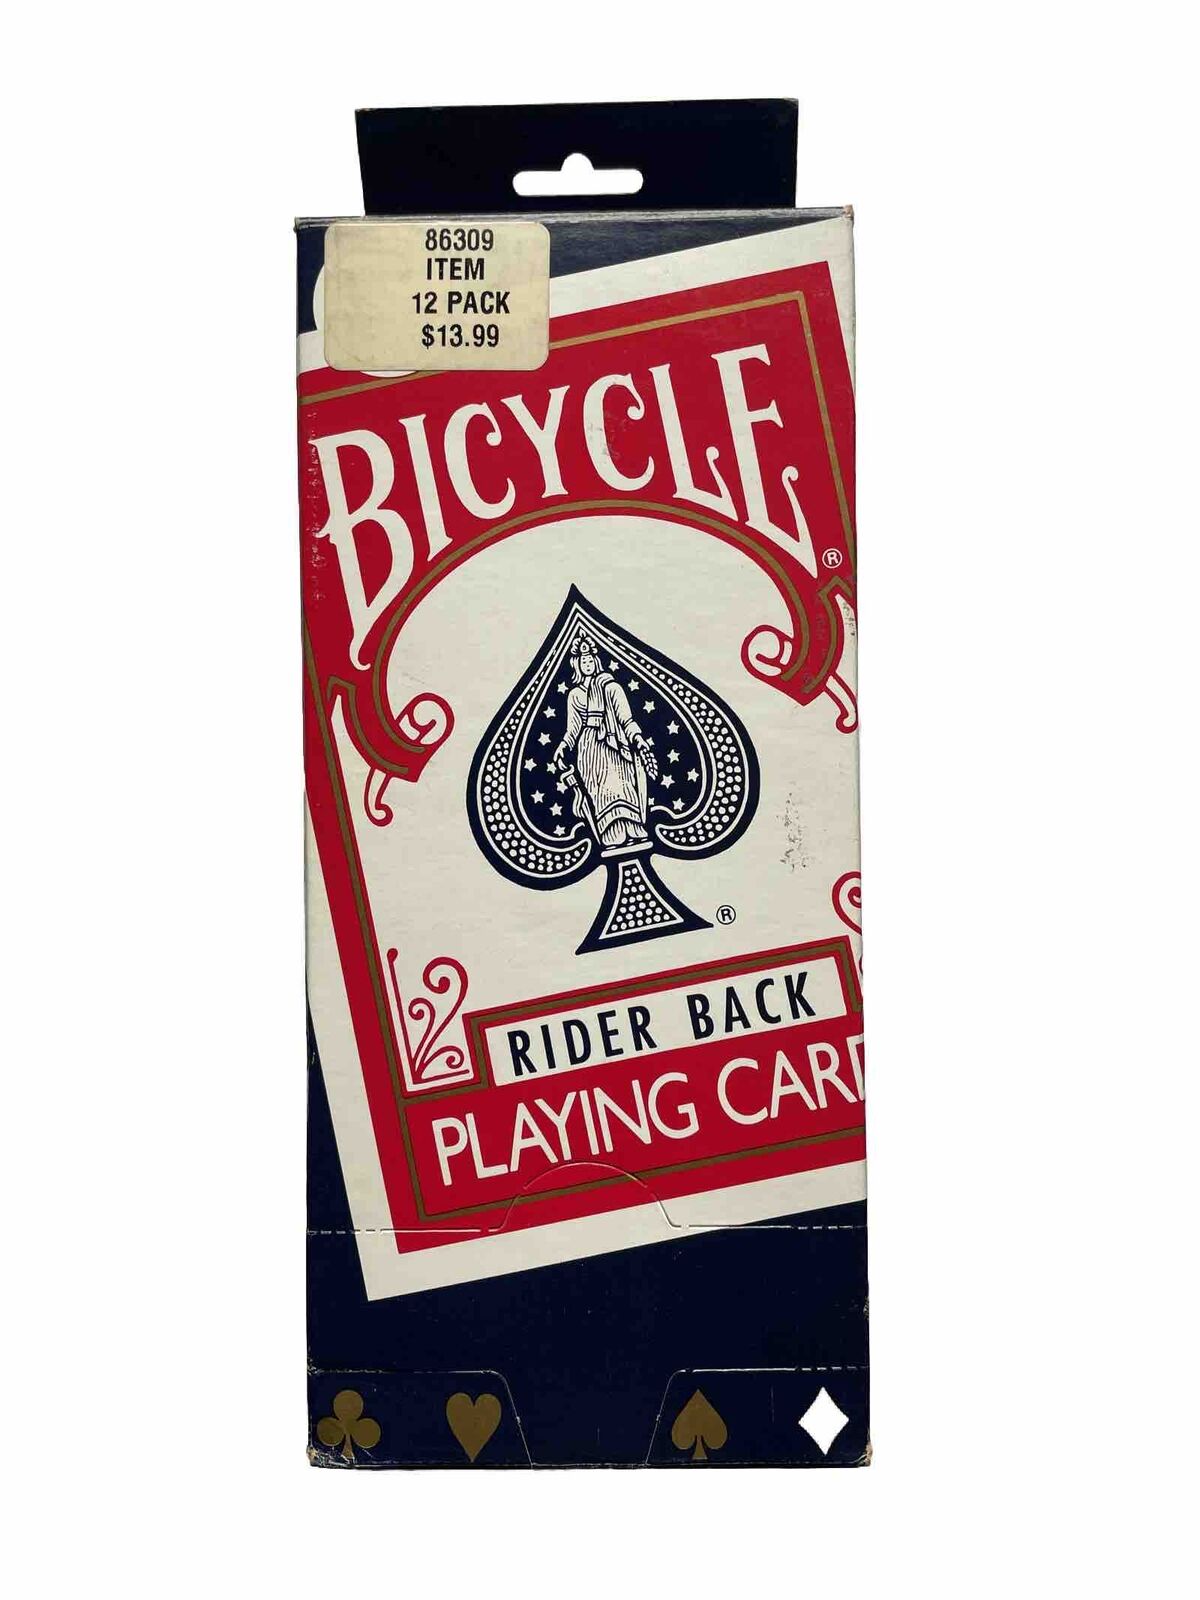 12 Vintage Bicycle Rider Back Poker Cards Sealed OLD STOCK 808G with Display Box